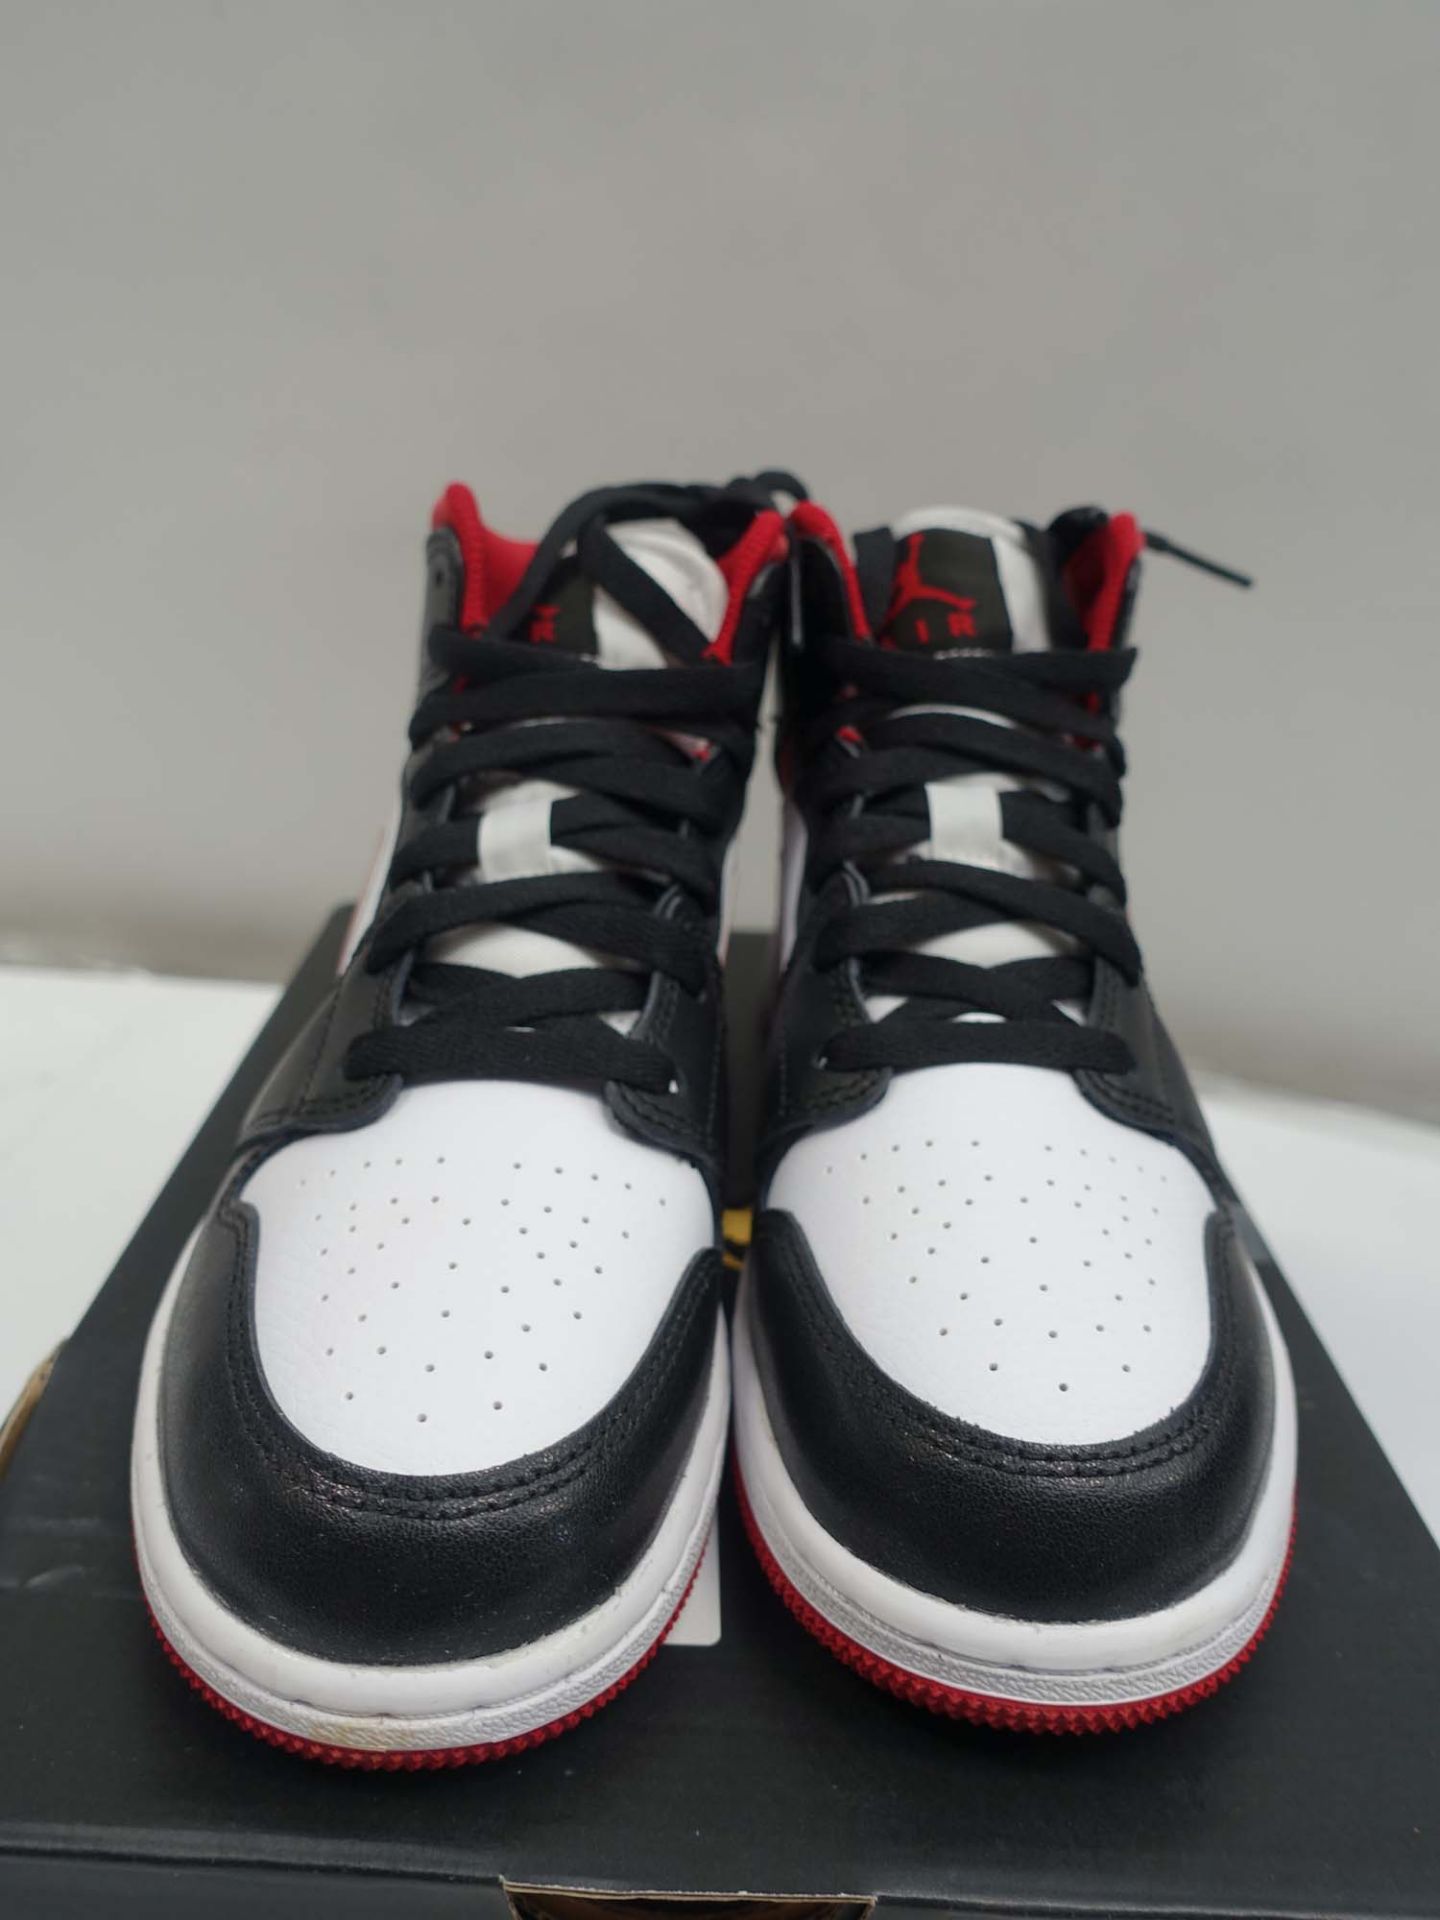 Nike Air Jordan 1 Mid Gym Red Black White childrens trainers size 4 - Image 2 of 3